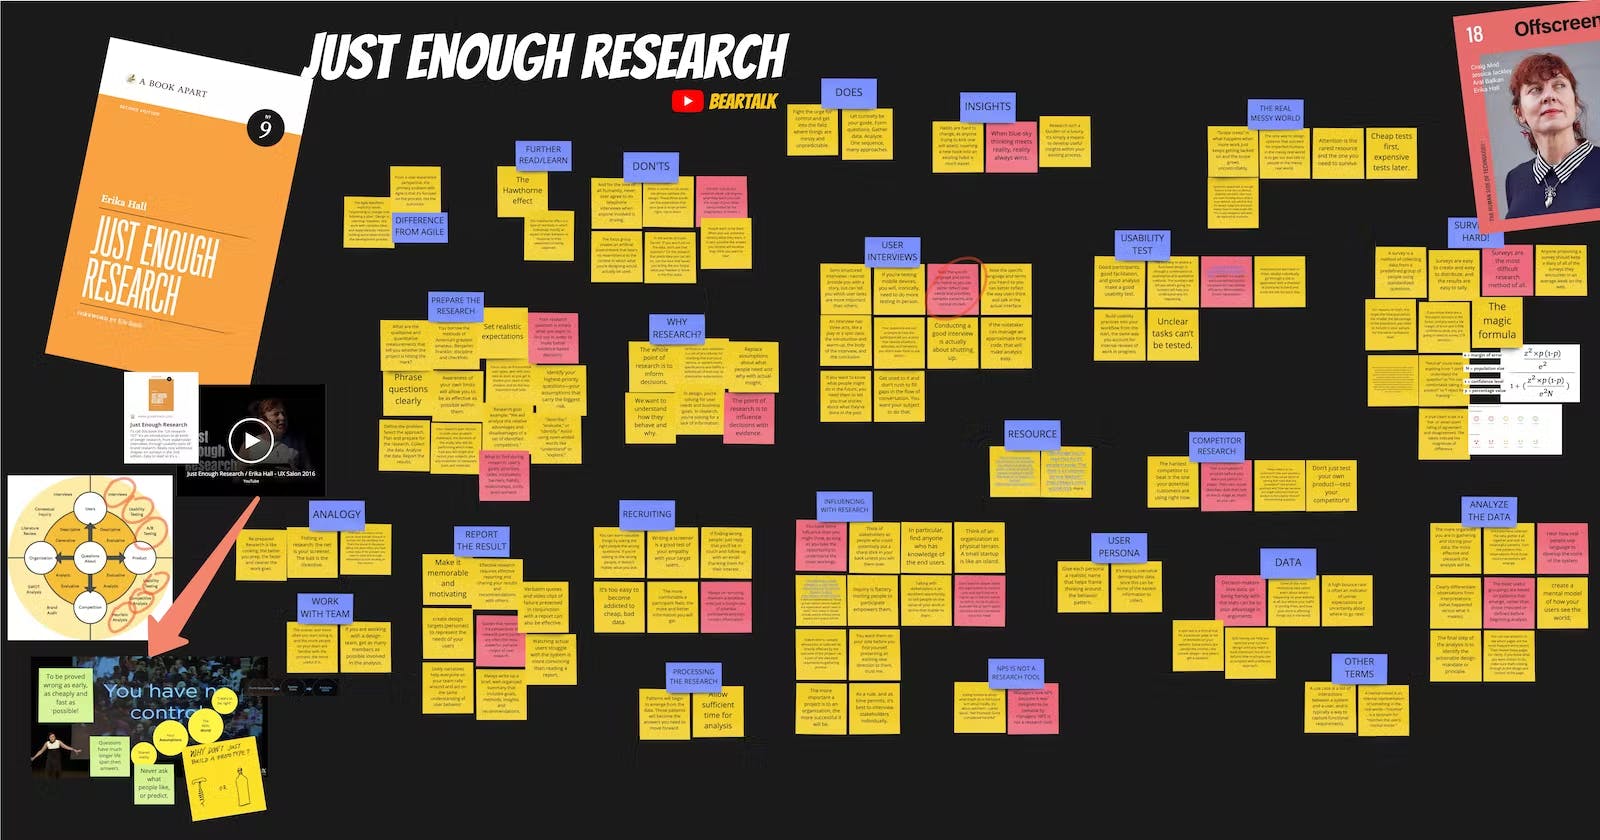 Just Enough Research by Erika Hall - Book review